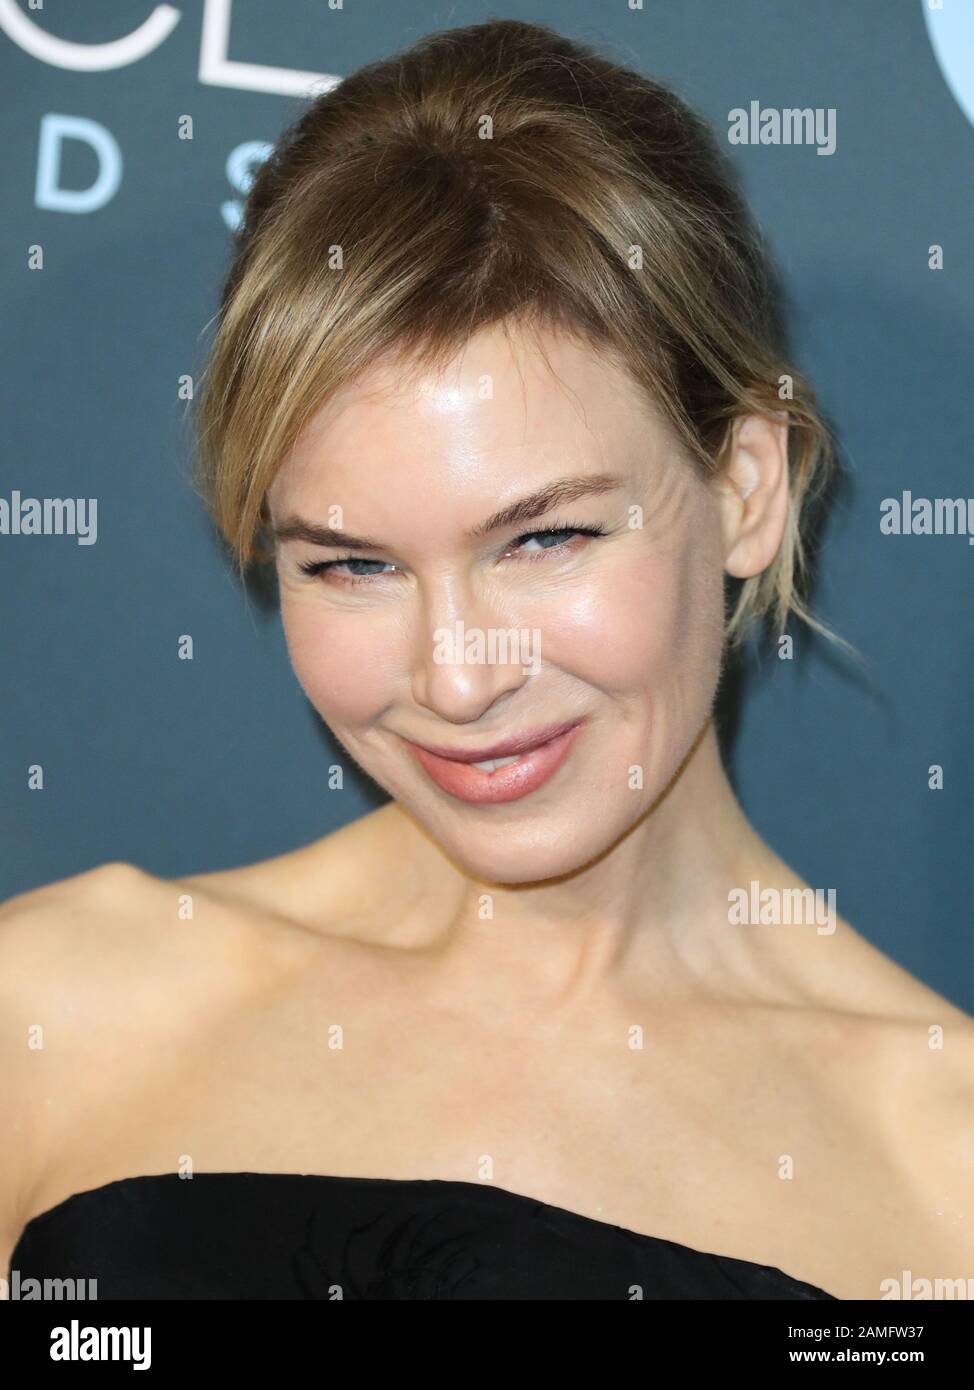 SANTA MONICA, LOS ANGELES, CALIFORNIA, USA - JANUARY 12: Actress Renee Zellweger wearing a Dior Haute Couture dress, David Webb jewelry, and Jimmy Choo shoes arrives at the 25th Annual Critics' Choice Awards held at the Barker Hangar on January 12, 2020 in Santa Monica, Los Angeles, California, United States. (Photo by Xavier Collin/Image Press Agency) Stock Photo